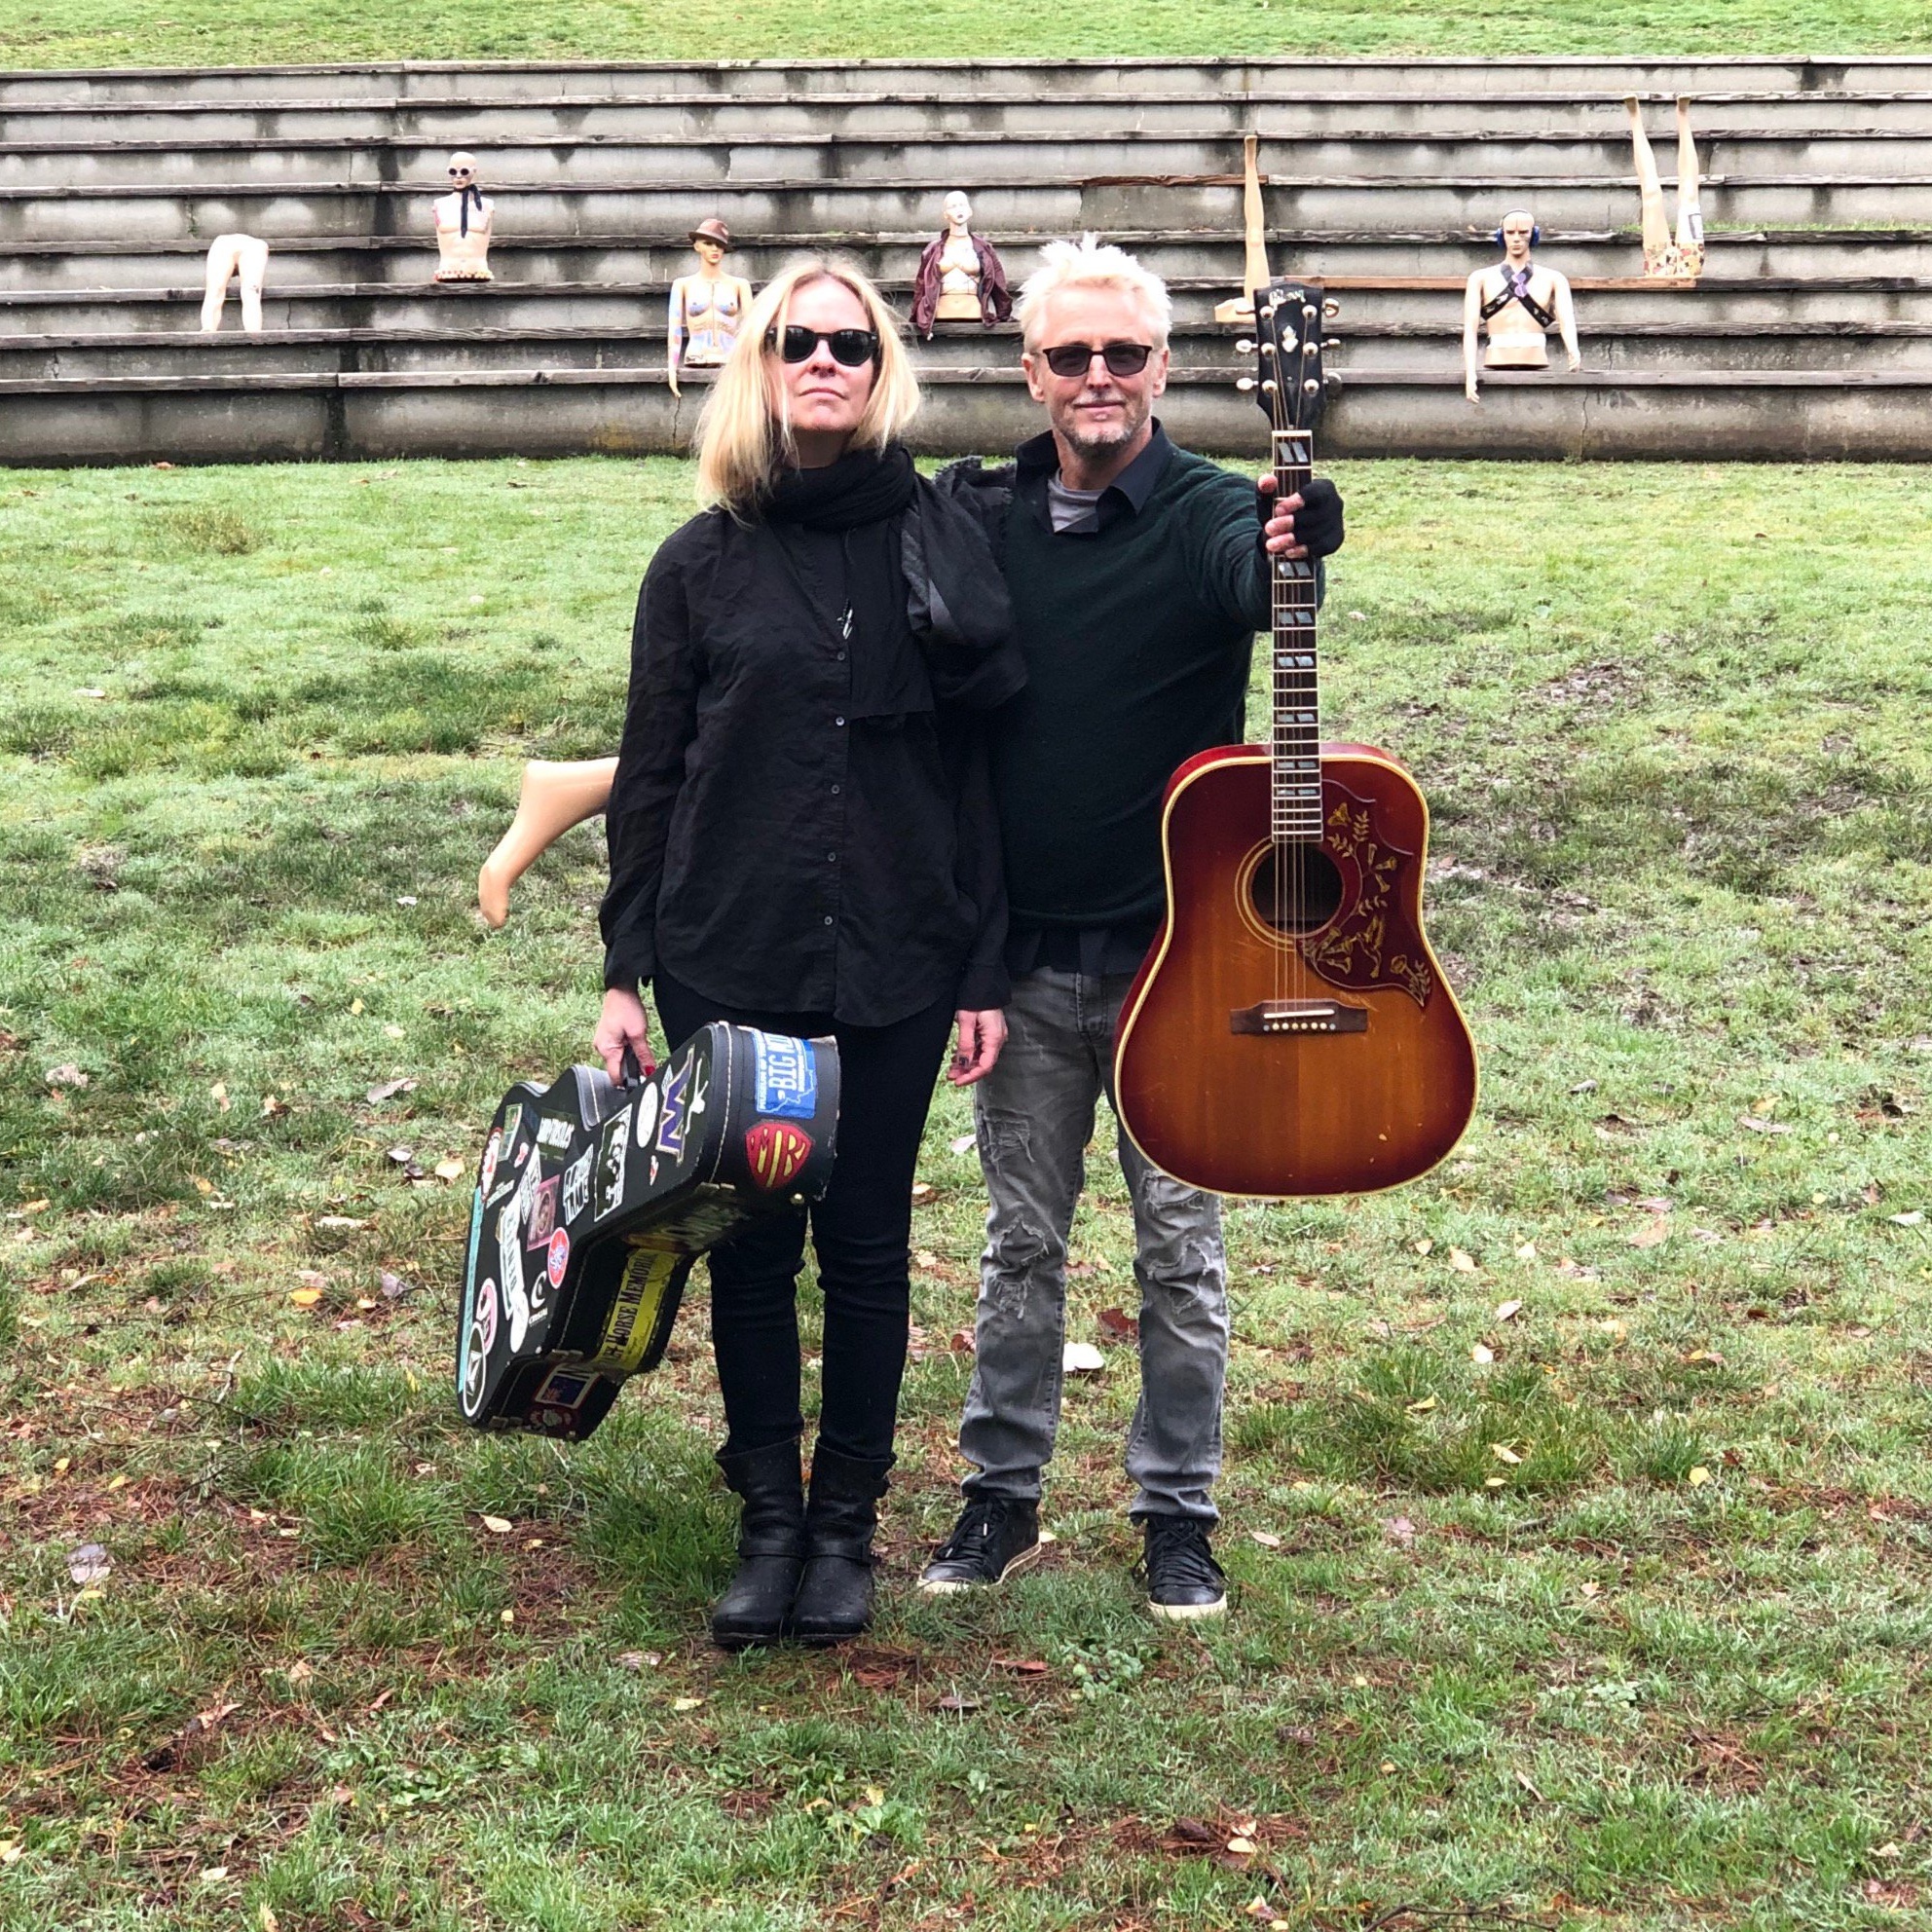 Infinite Color & Sound: A new project by Mike McCready and Kate Neckel